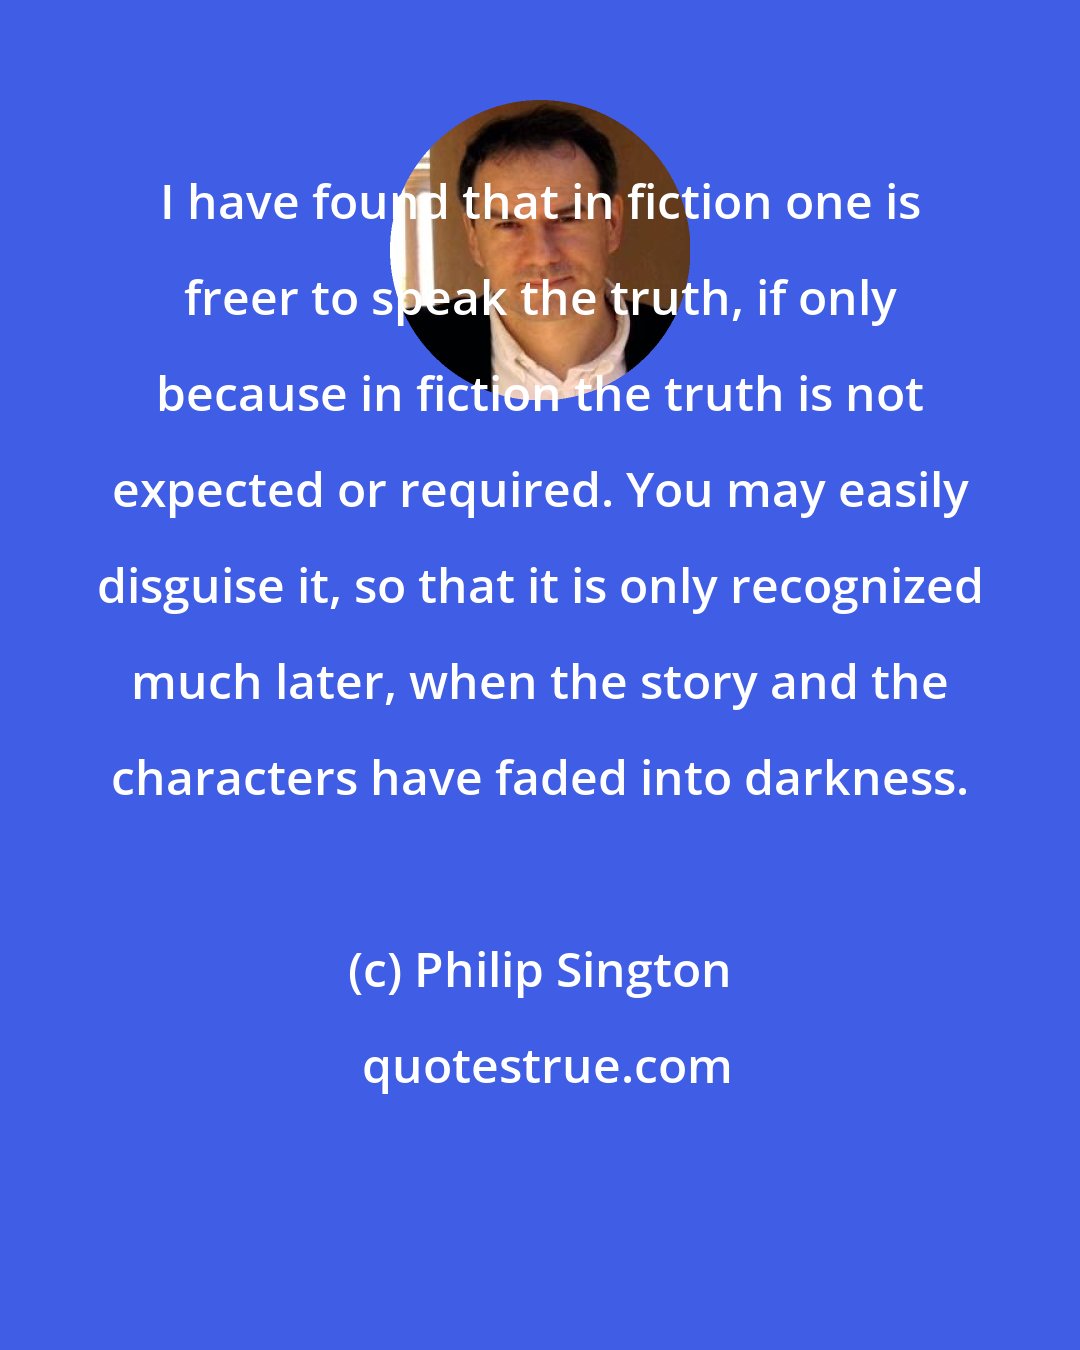 Philip Sington: I have found that in fiction one is freer to speak the truth, if only because in fiction the truth is not expected or required. You may easily disguise it, so that it is only recognized much later, when the story and the characters have faded into darkness.